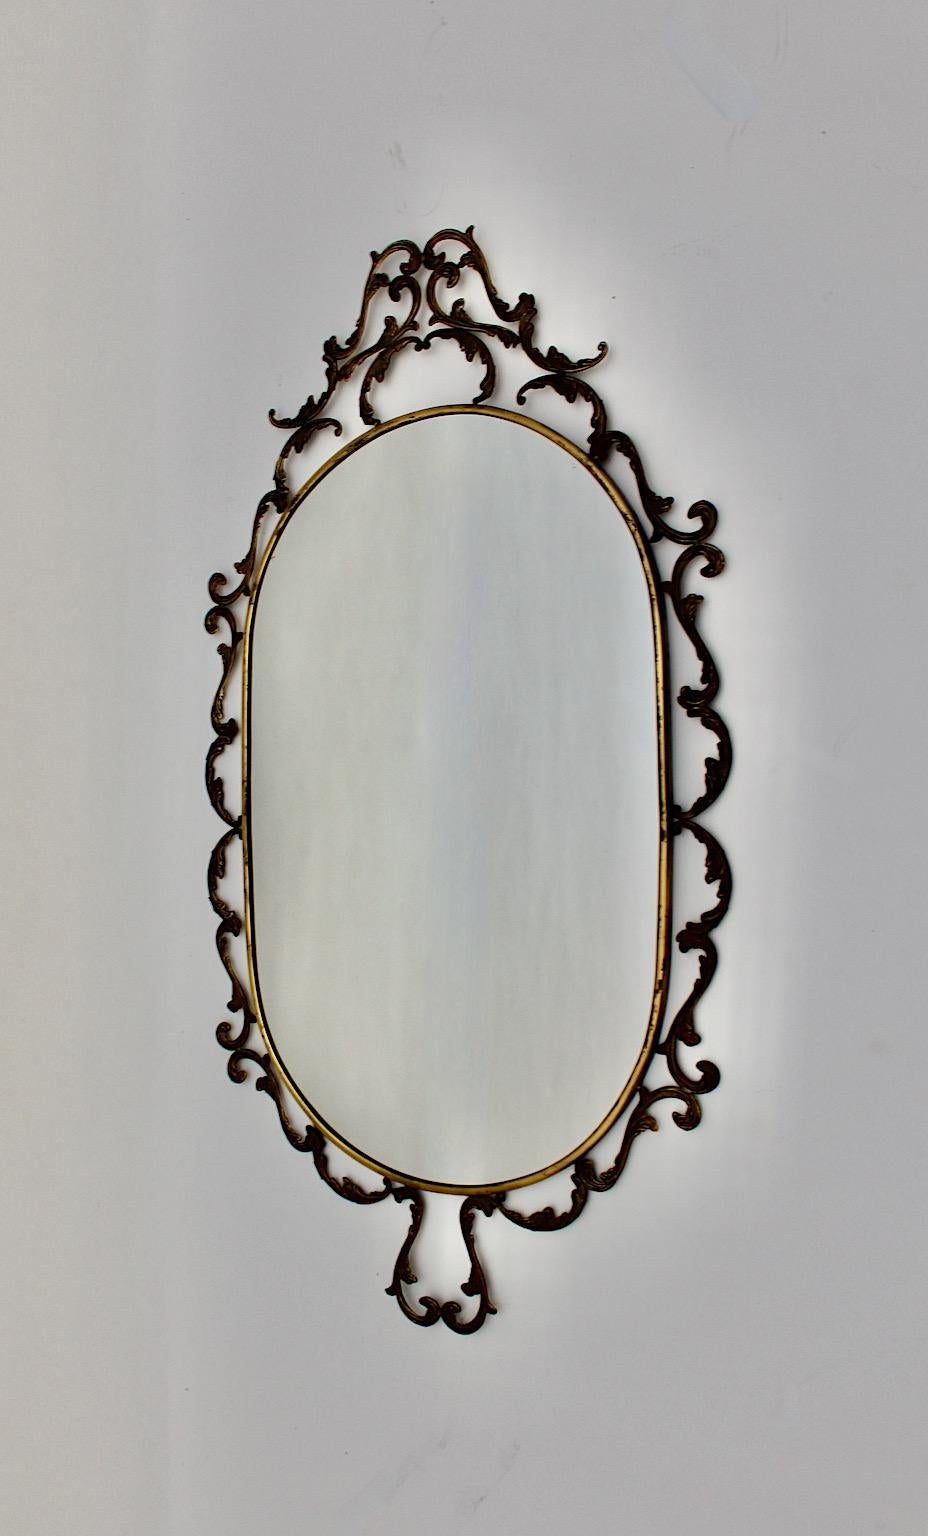 Italian Baroque Revival Style Vintage Oval Wall Mirror Brass 1960s Italy For Sale